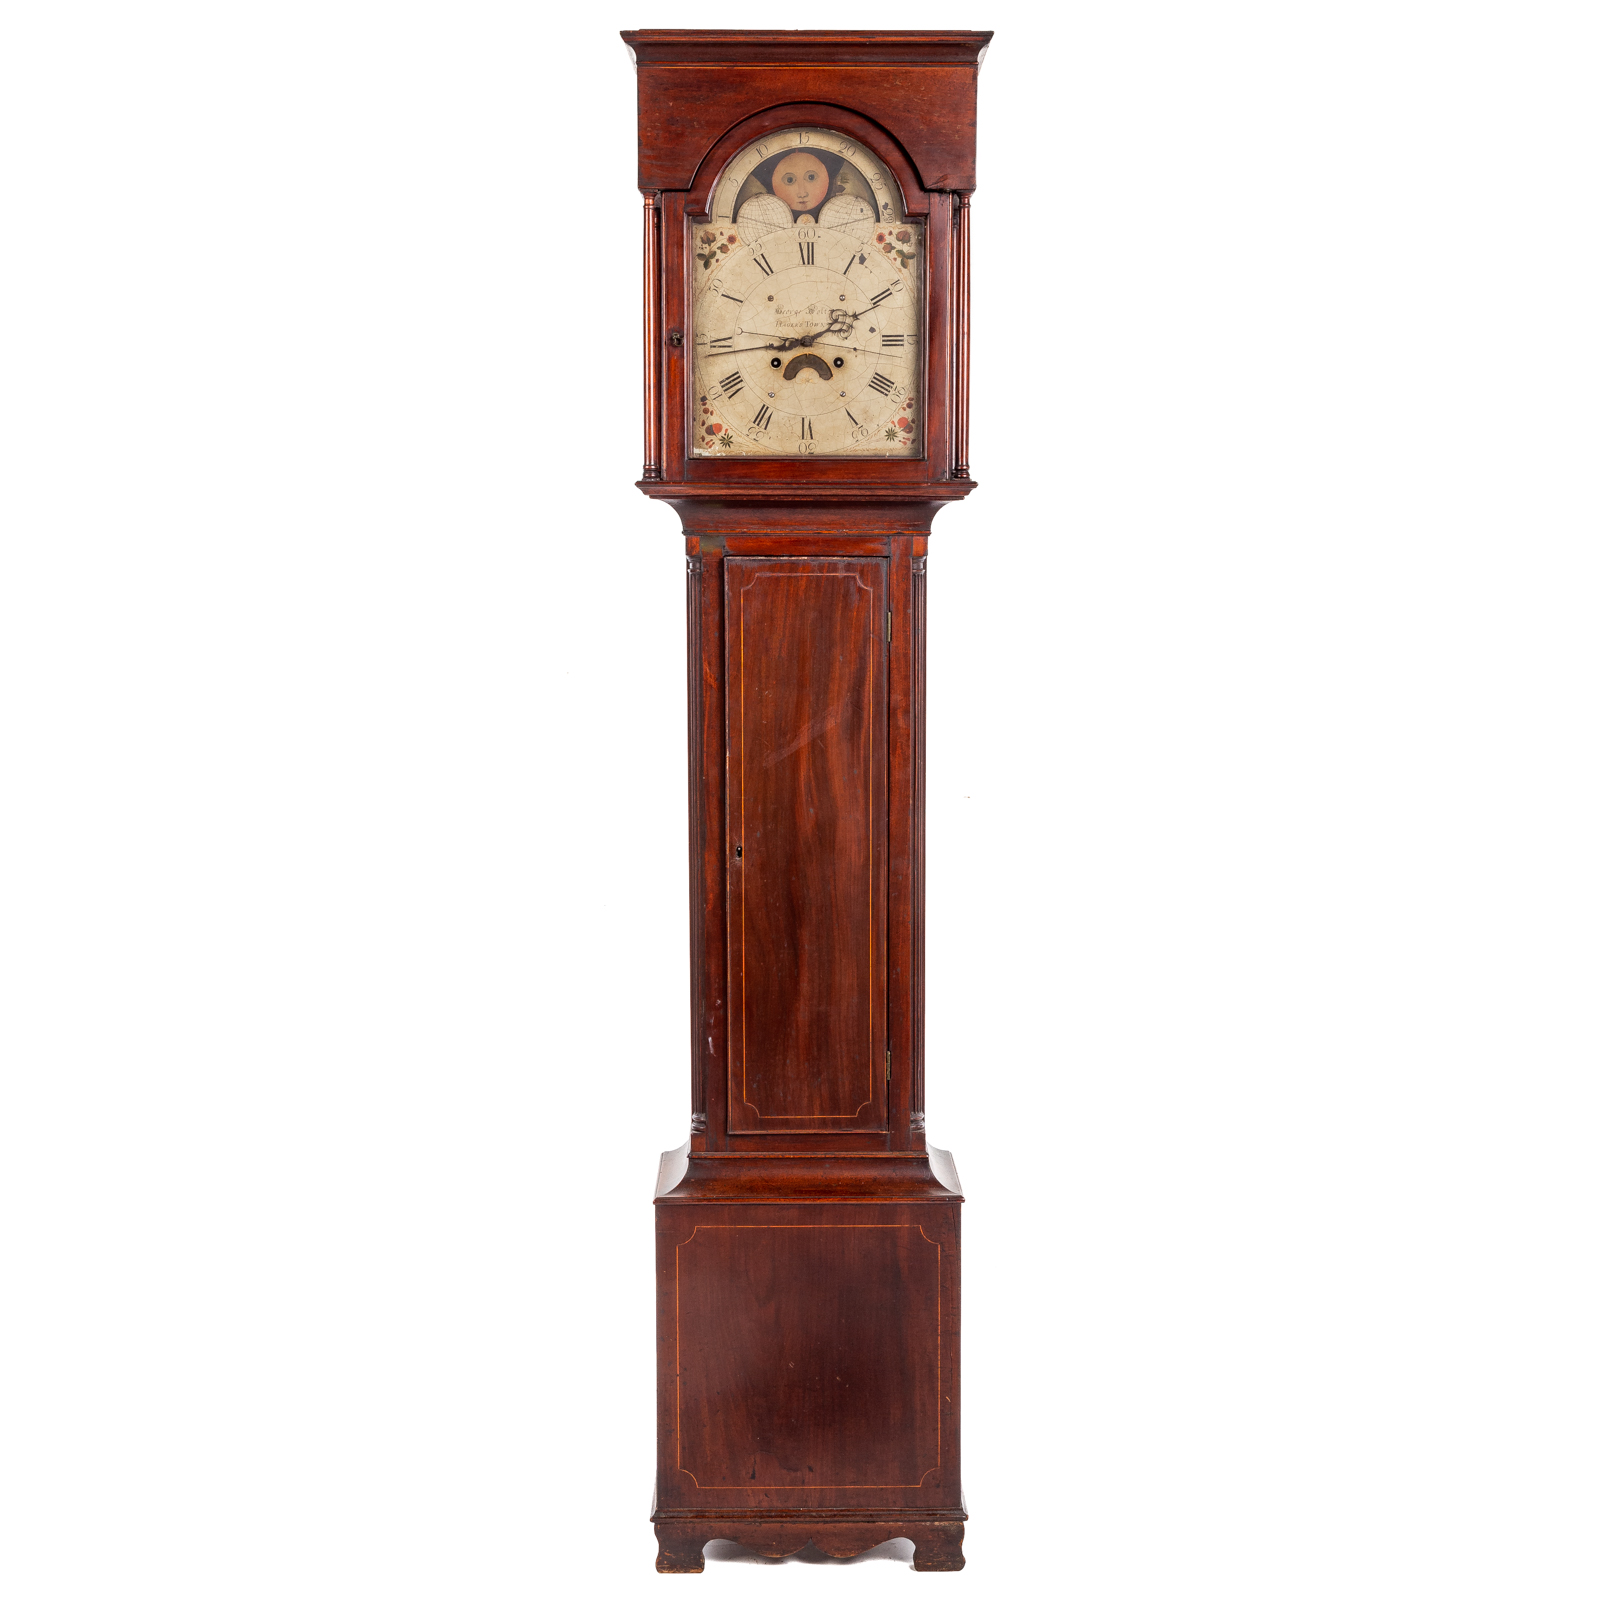 FEDERAL TALL CASE CLOCK BY GEORGE